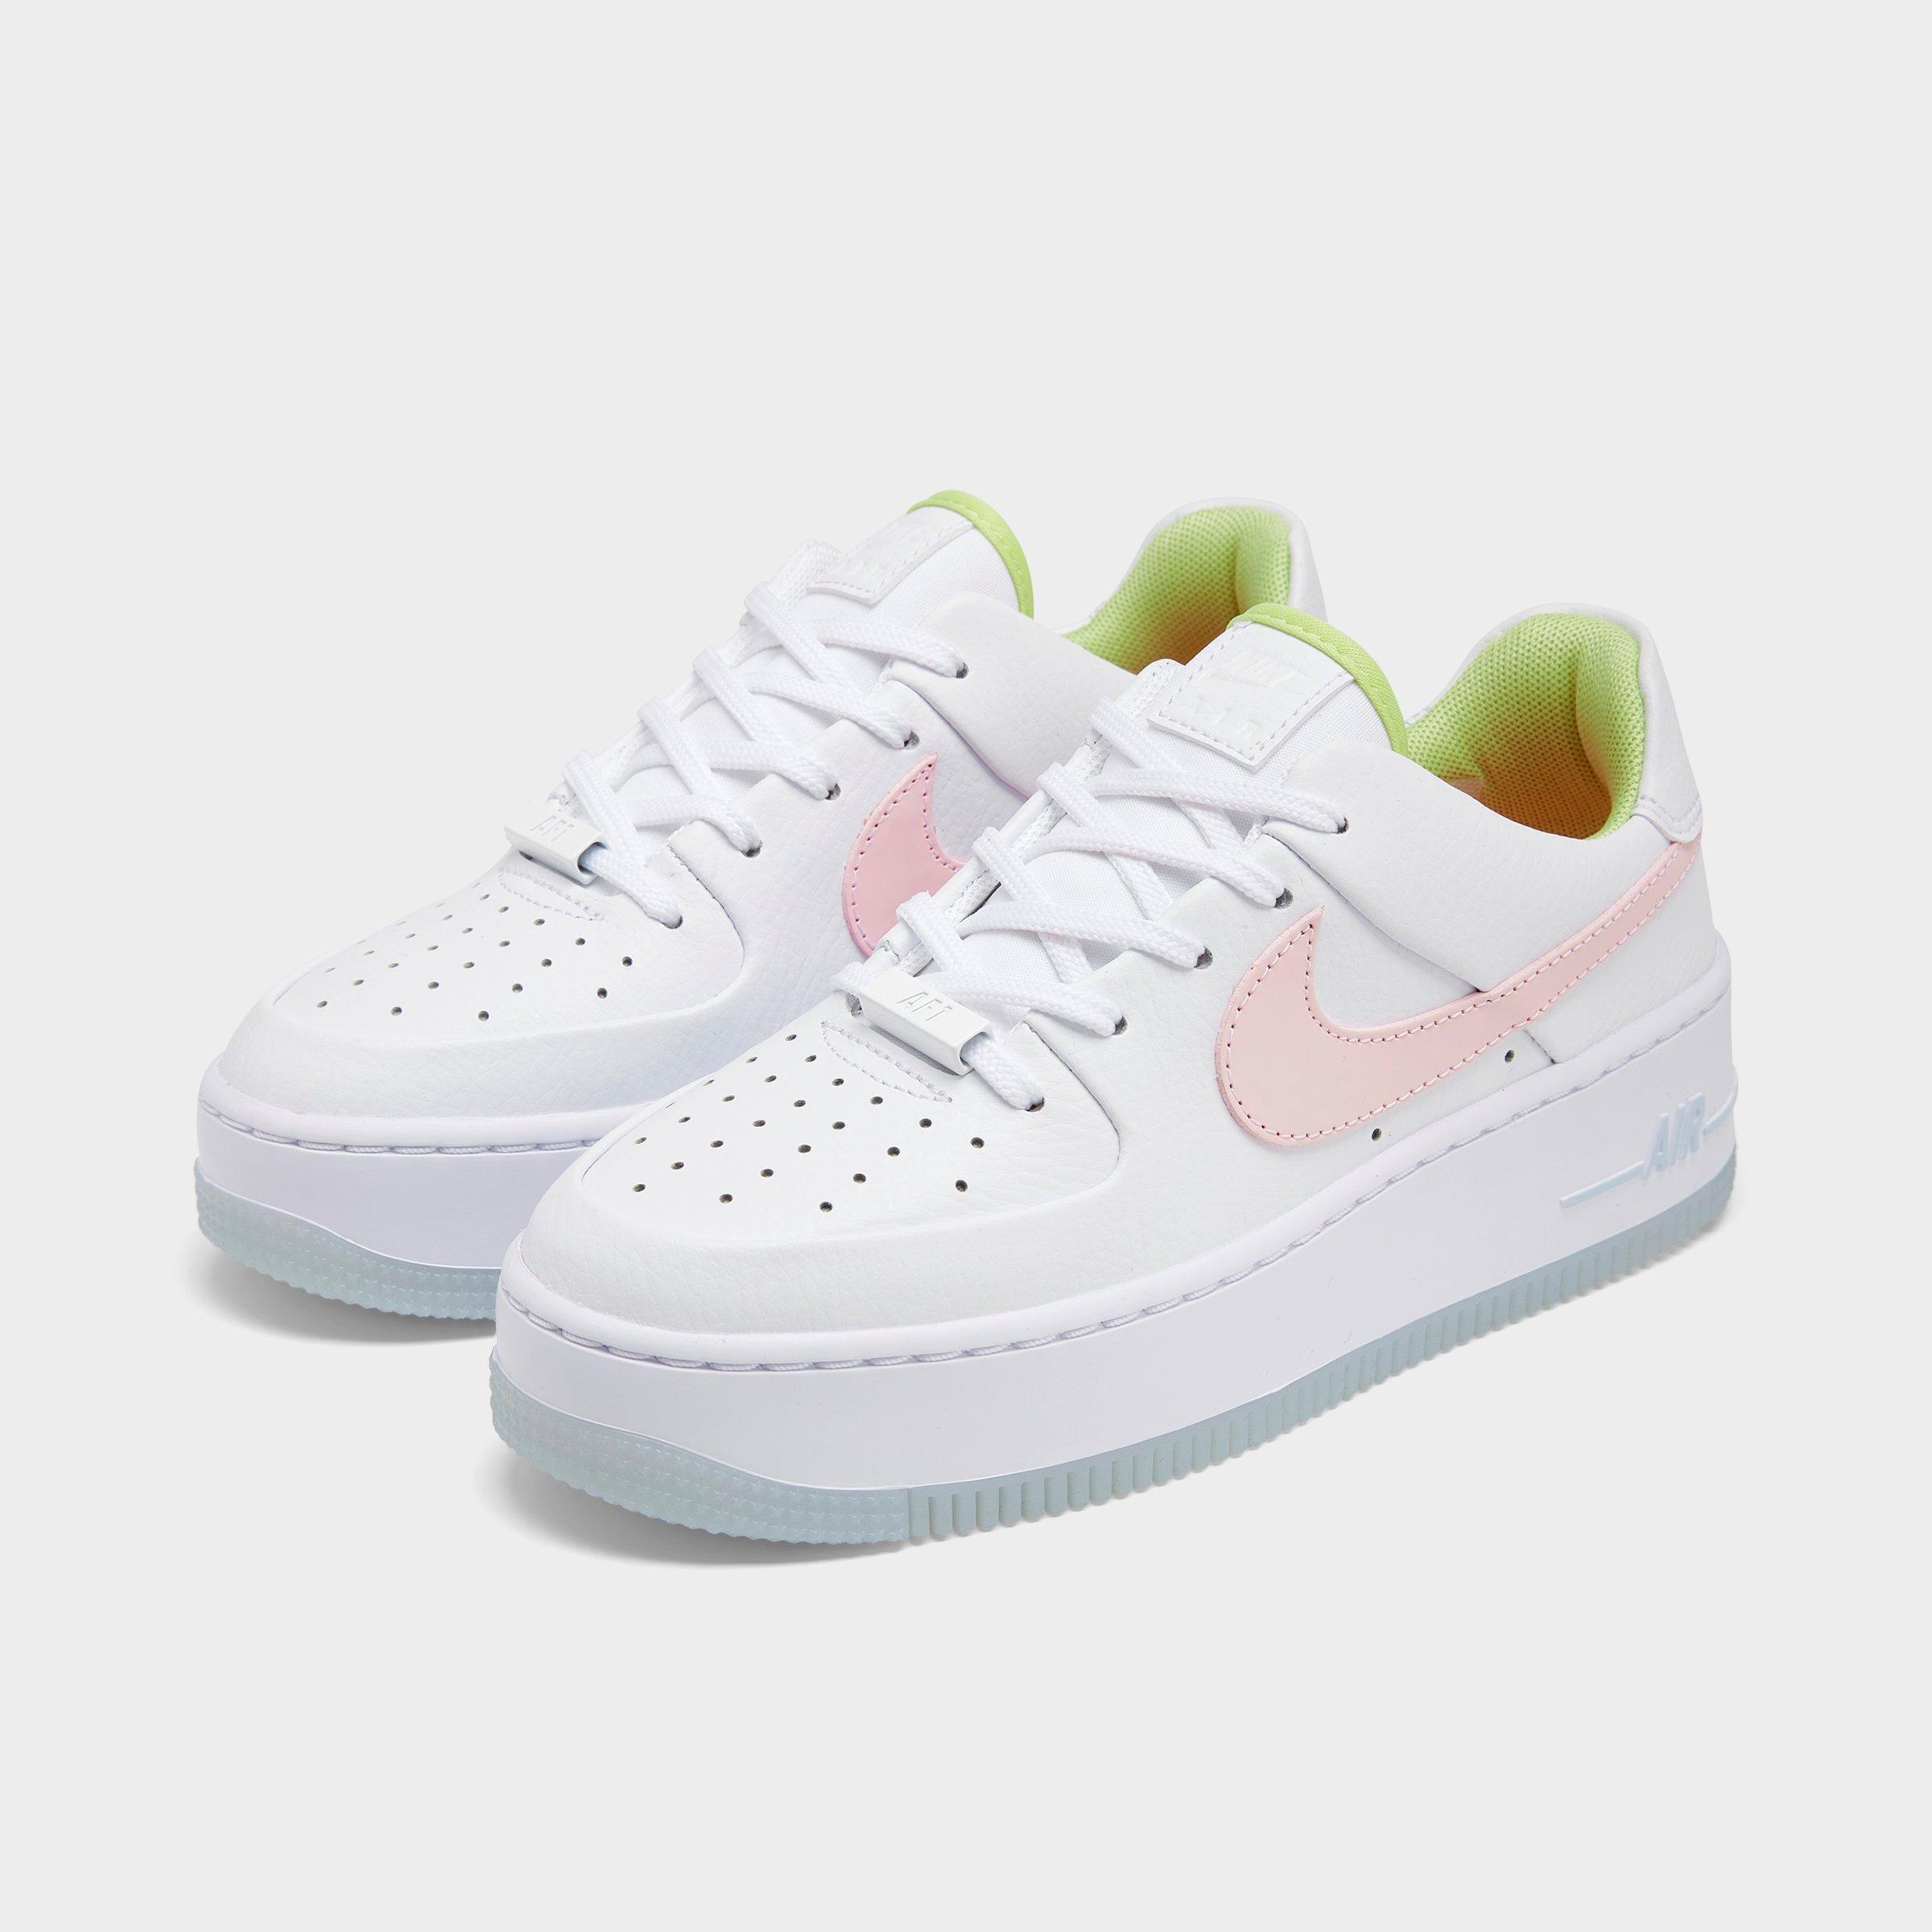 nike air force 1 sage low size 8